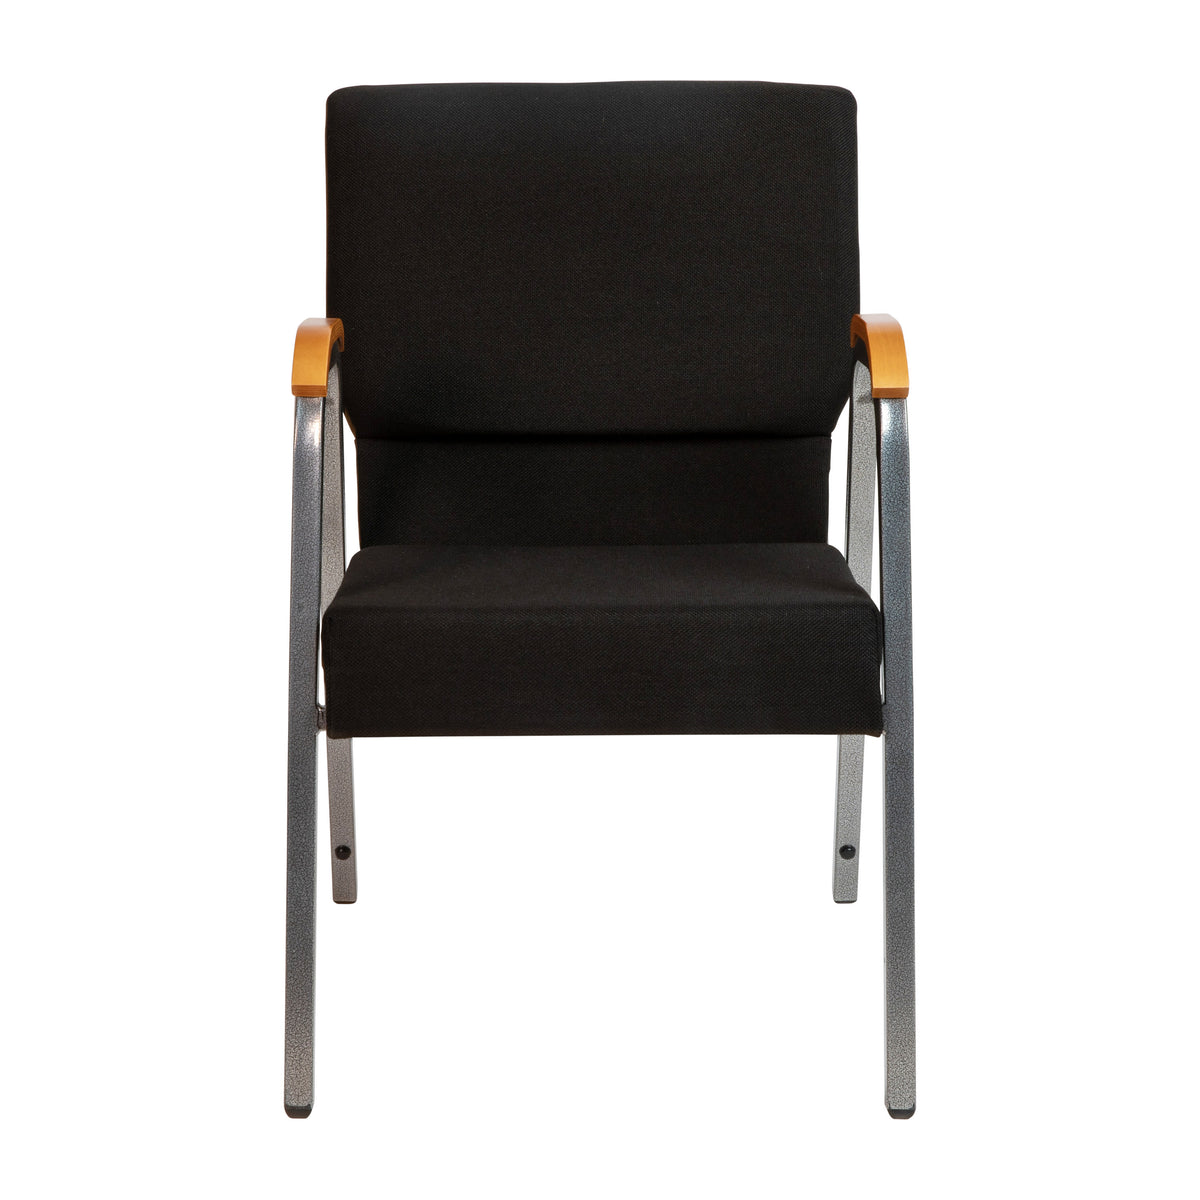 Black Fabric/Silver Vein Frame |#| 21inch Stackable Church Chair with Arms in Black Fabric - Silver Vein Frame